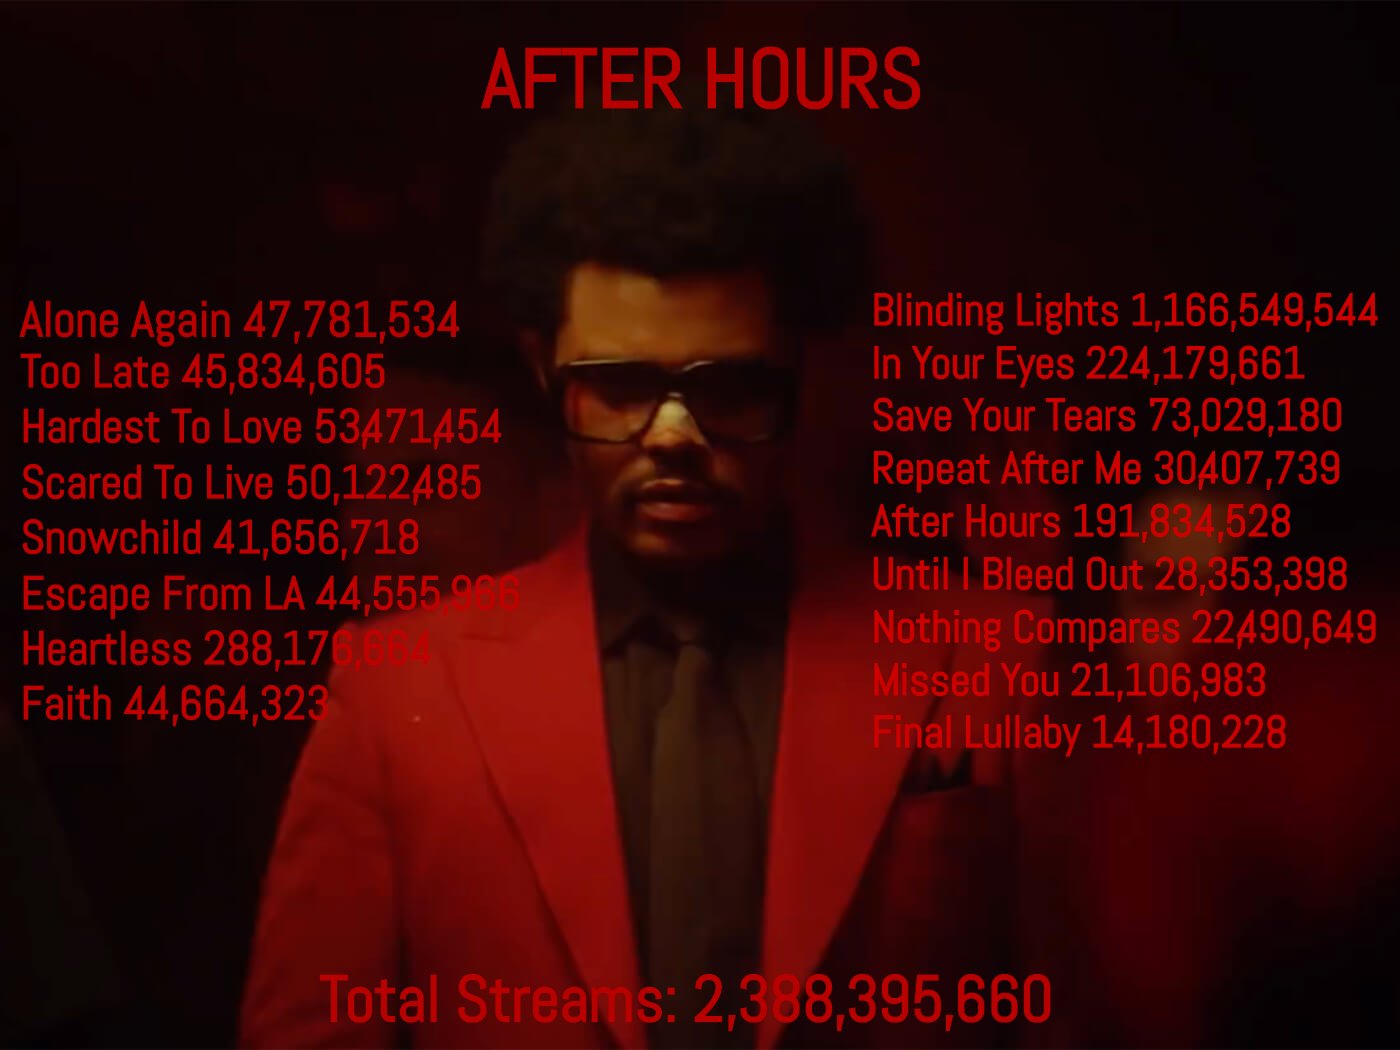 The Weeknd - After Hours Lyrics and Tracklist